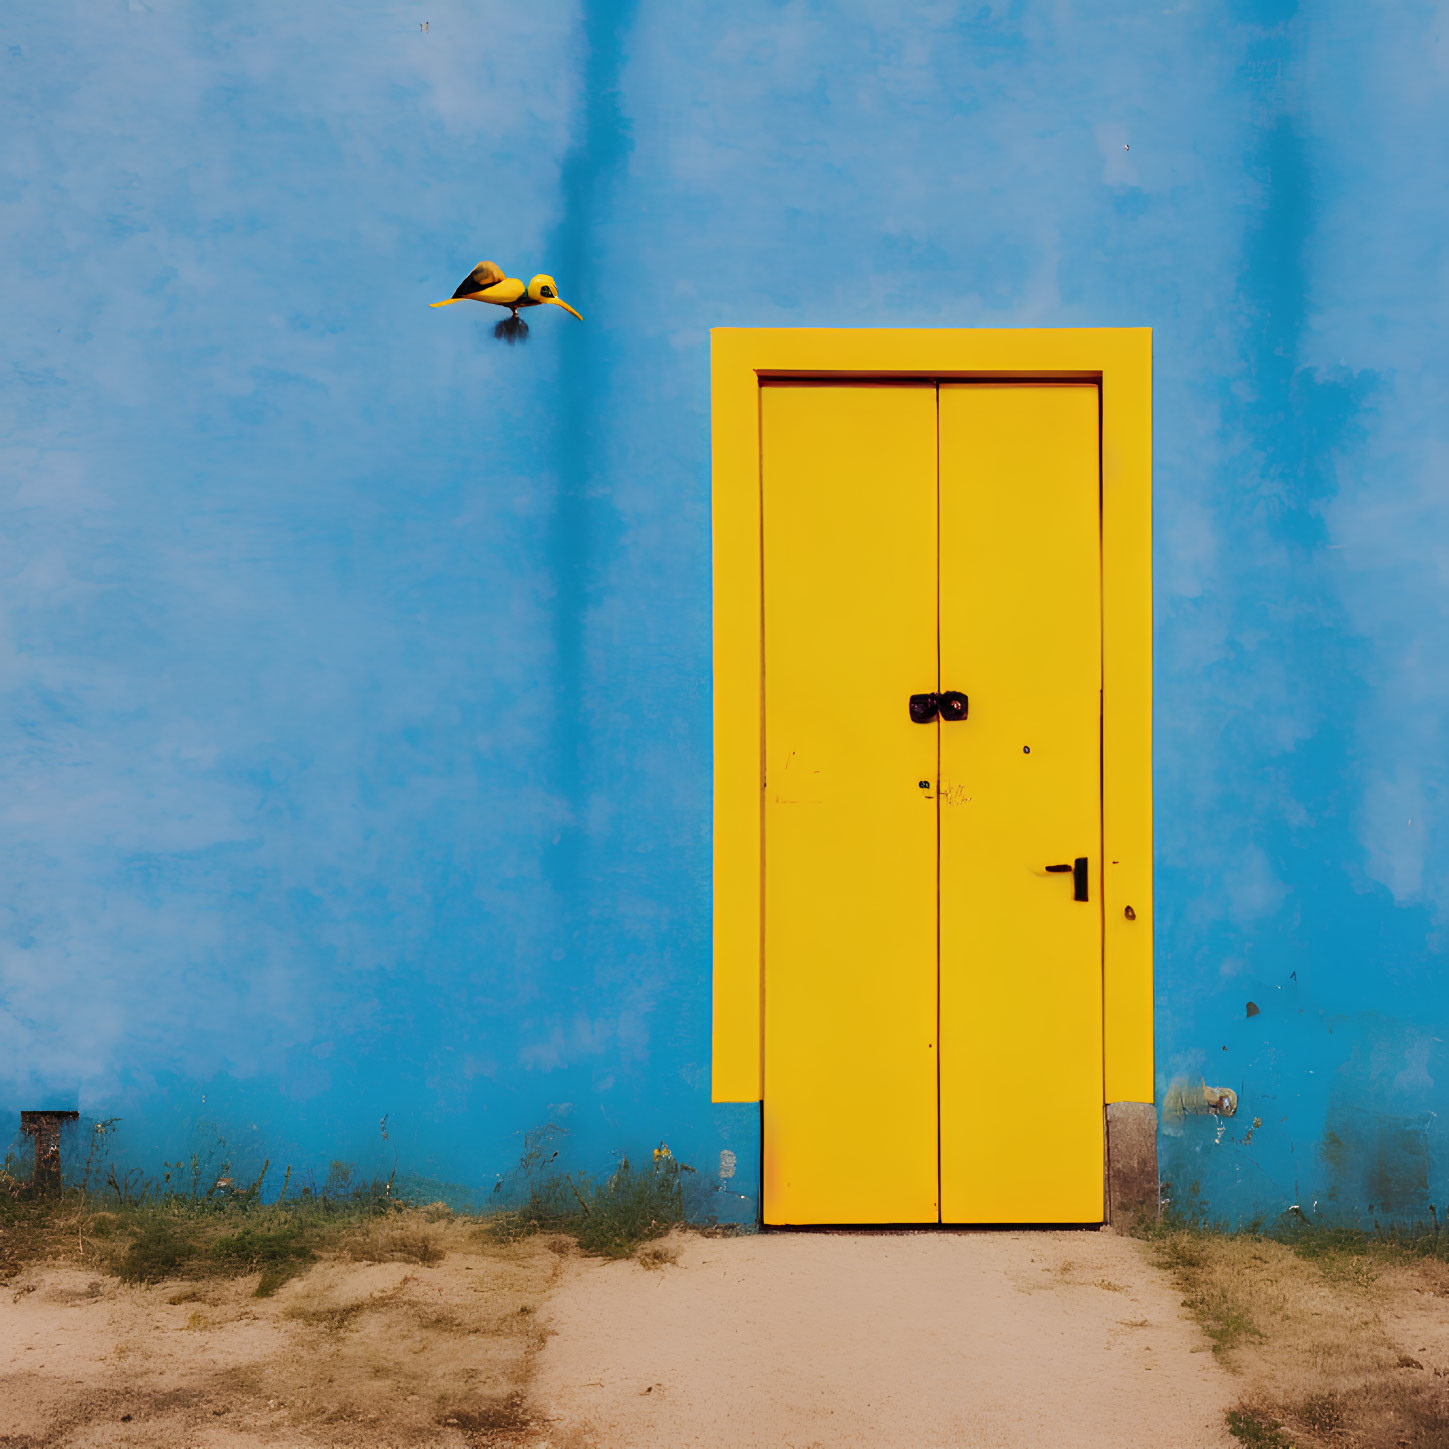 Bright Yellow Door on Blue Wall with Bird and Dirt Ground